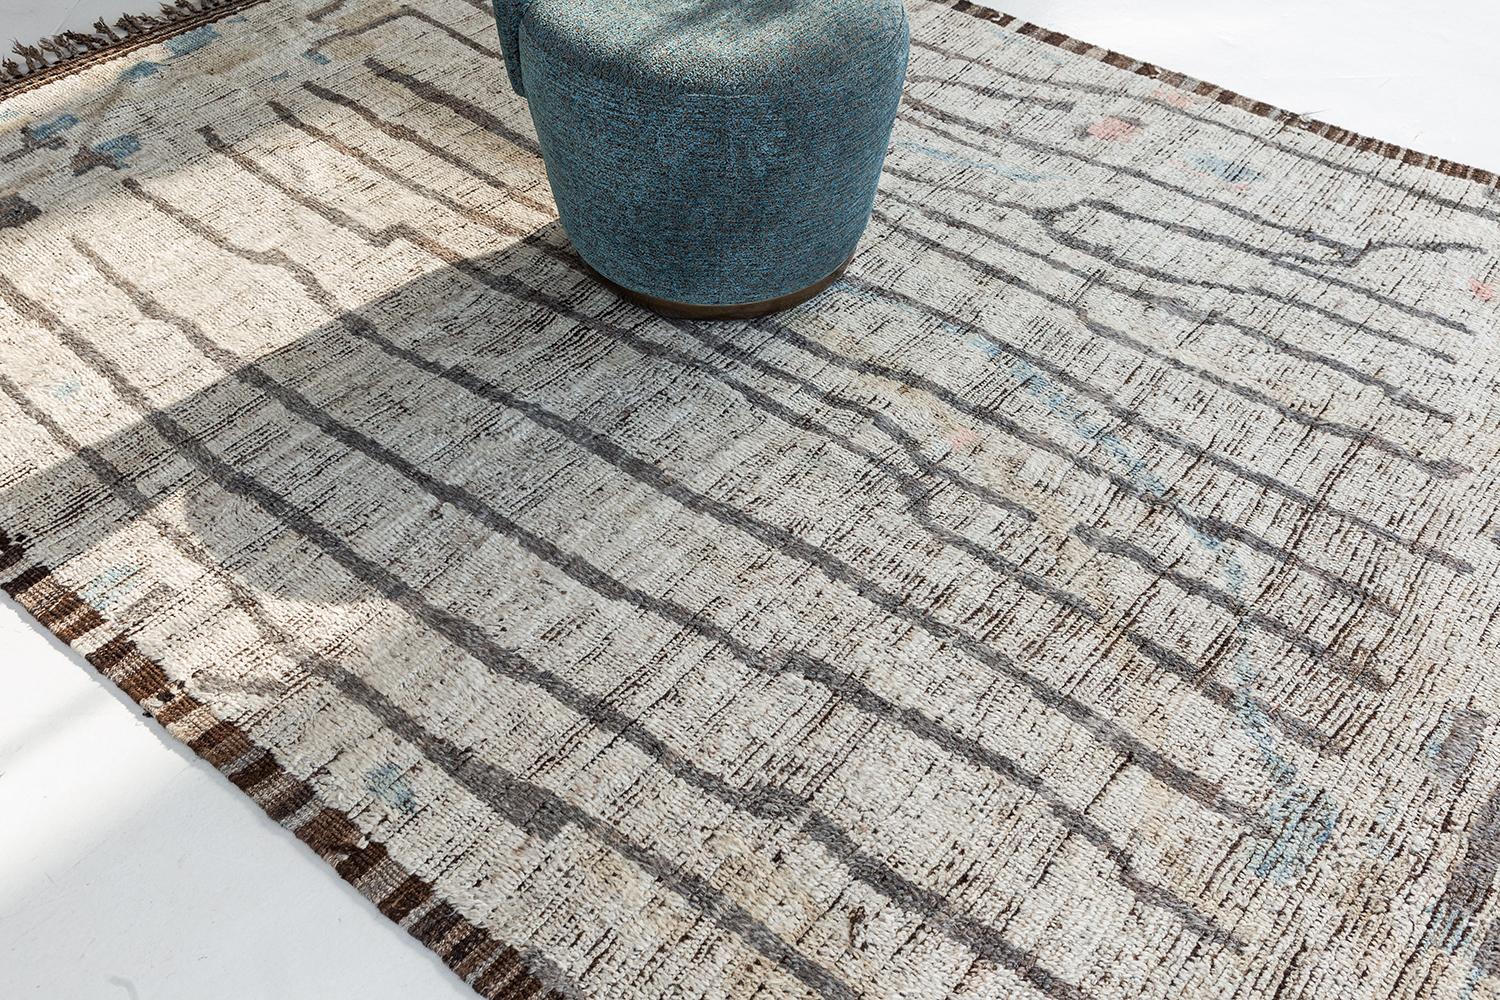 Berberis is an interplay between neutral tones and soothing muted colors into a modern-day interpretation of the Moroccan world. This rug's play of textures, linework, and unique shapes is what makes the Atlas Collection so unique and sought after.